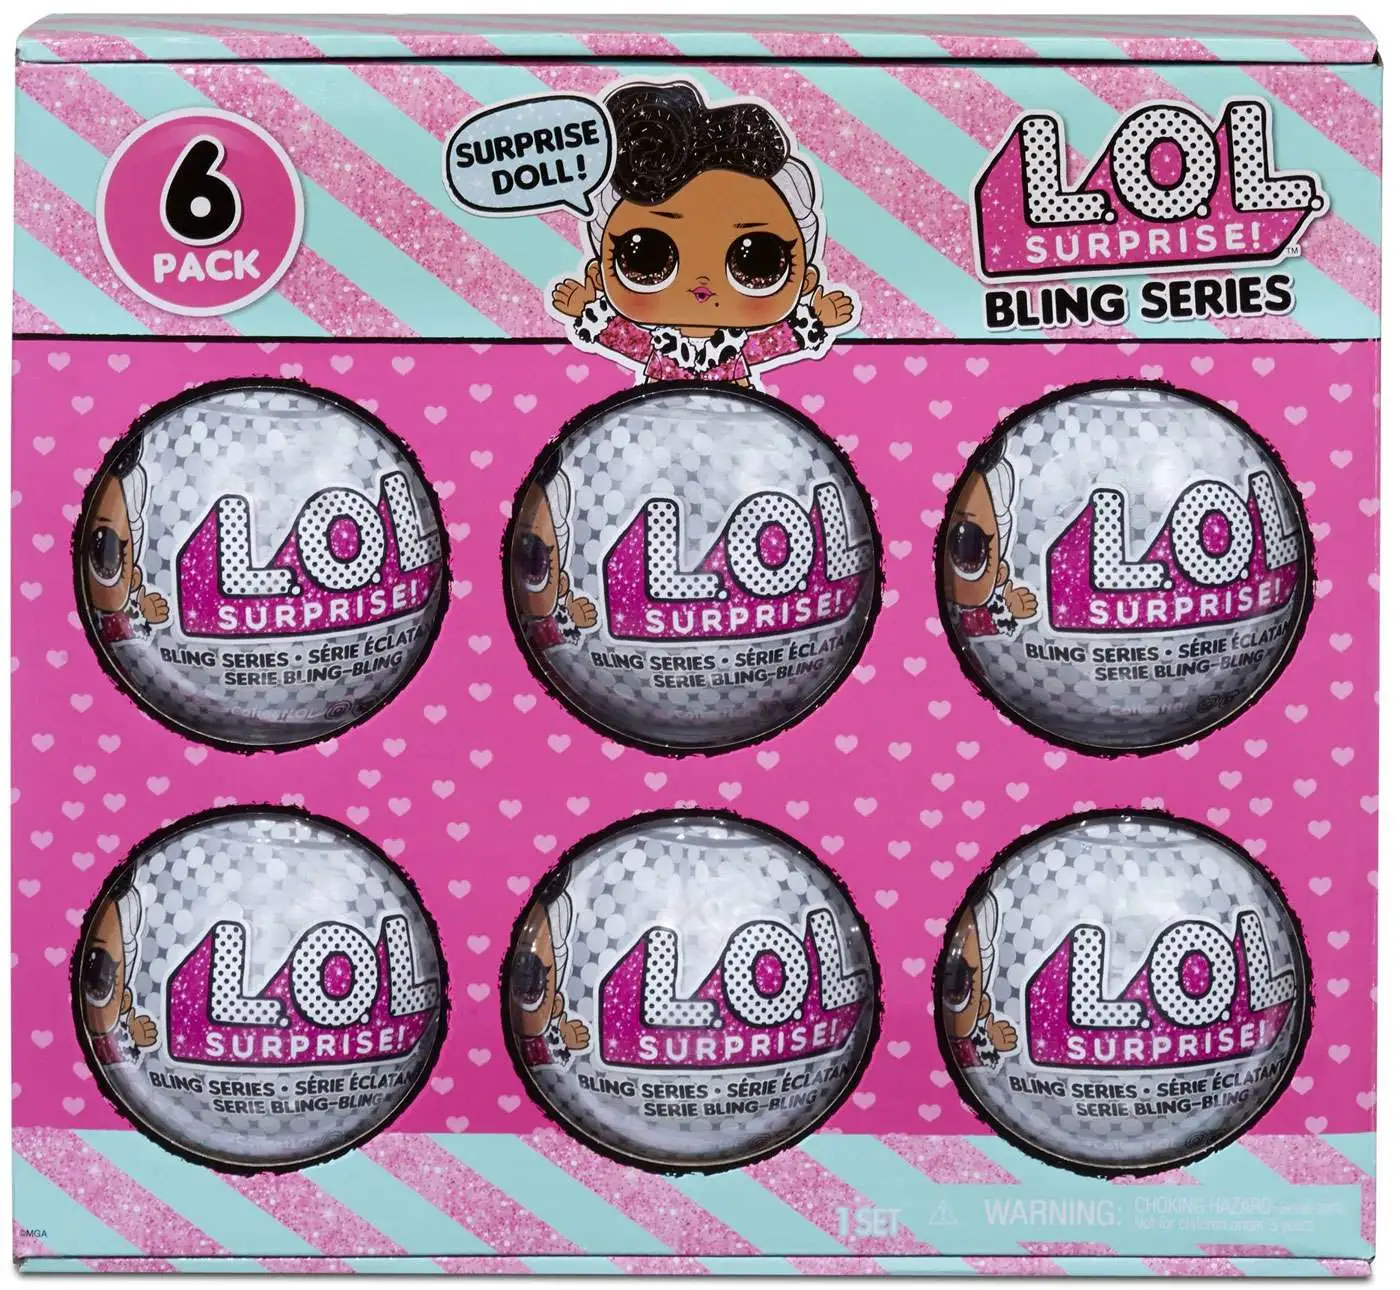 Charm Fizz In PDQ Series 3 Wave1 blind bags In Stock Surprise LOL DOLL L.O.L 